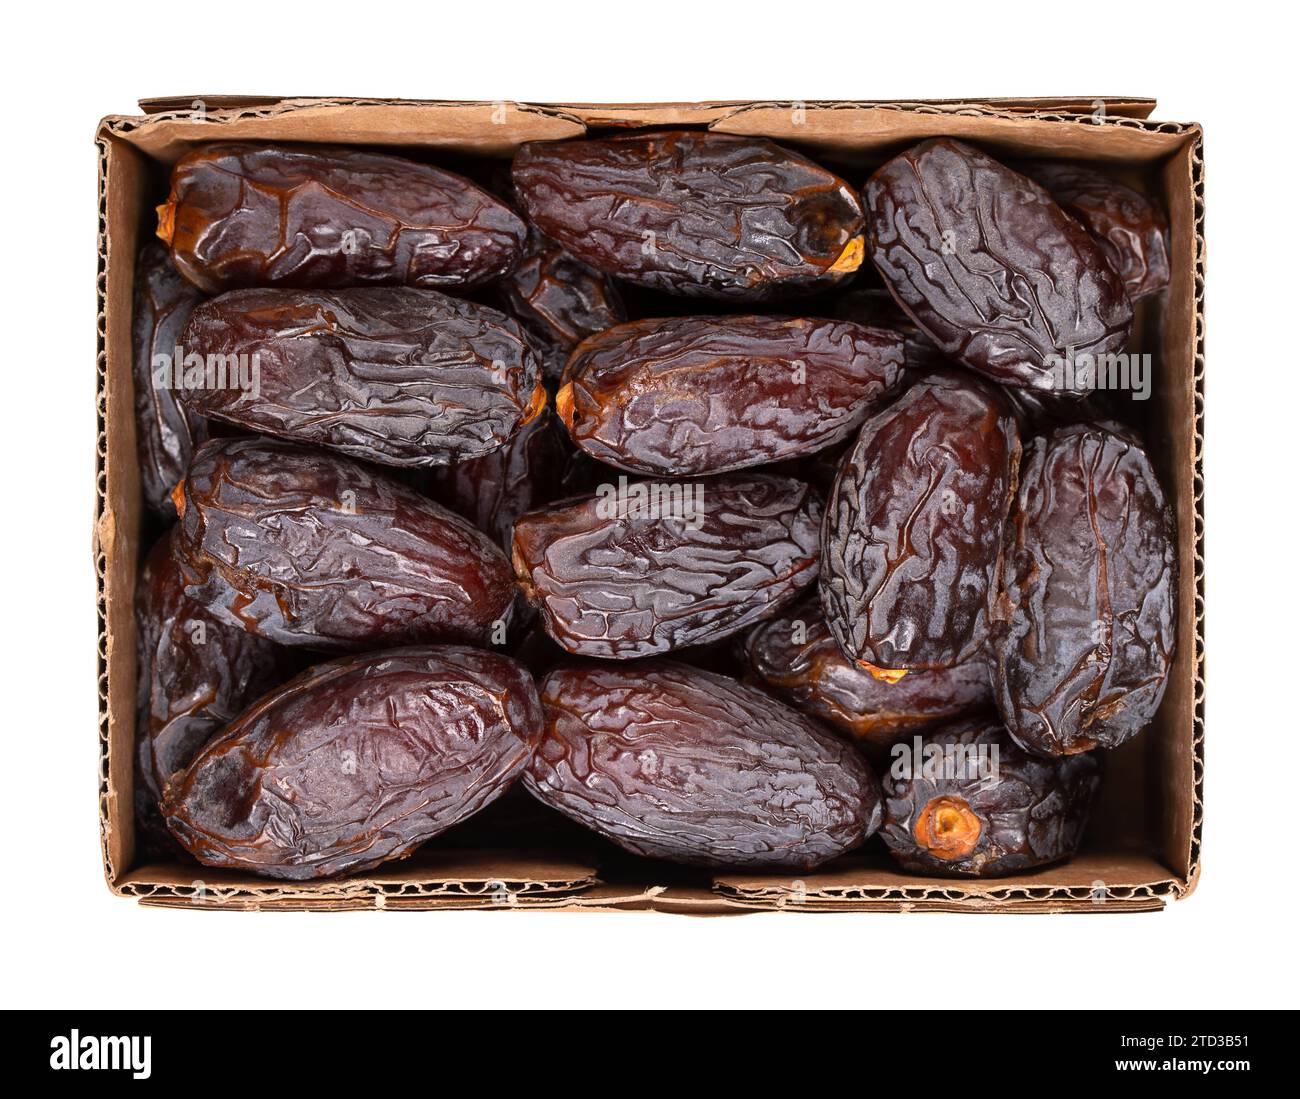 Medjool dates in a cardboard punnet. Sun-dried, large, soft and sweet cultivated variety of date, Phoenix dactylifera. Stock Photo